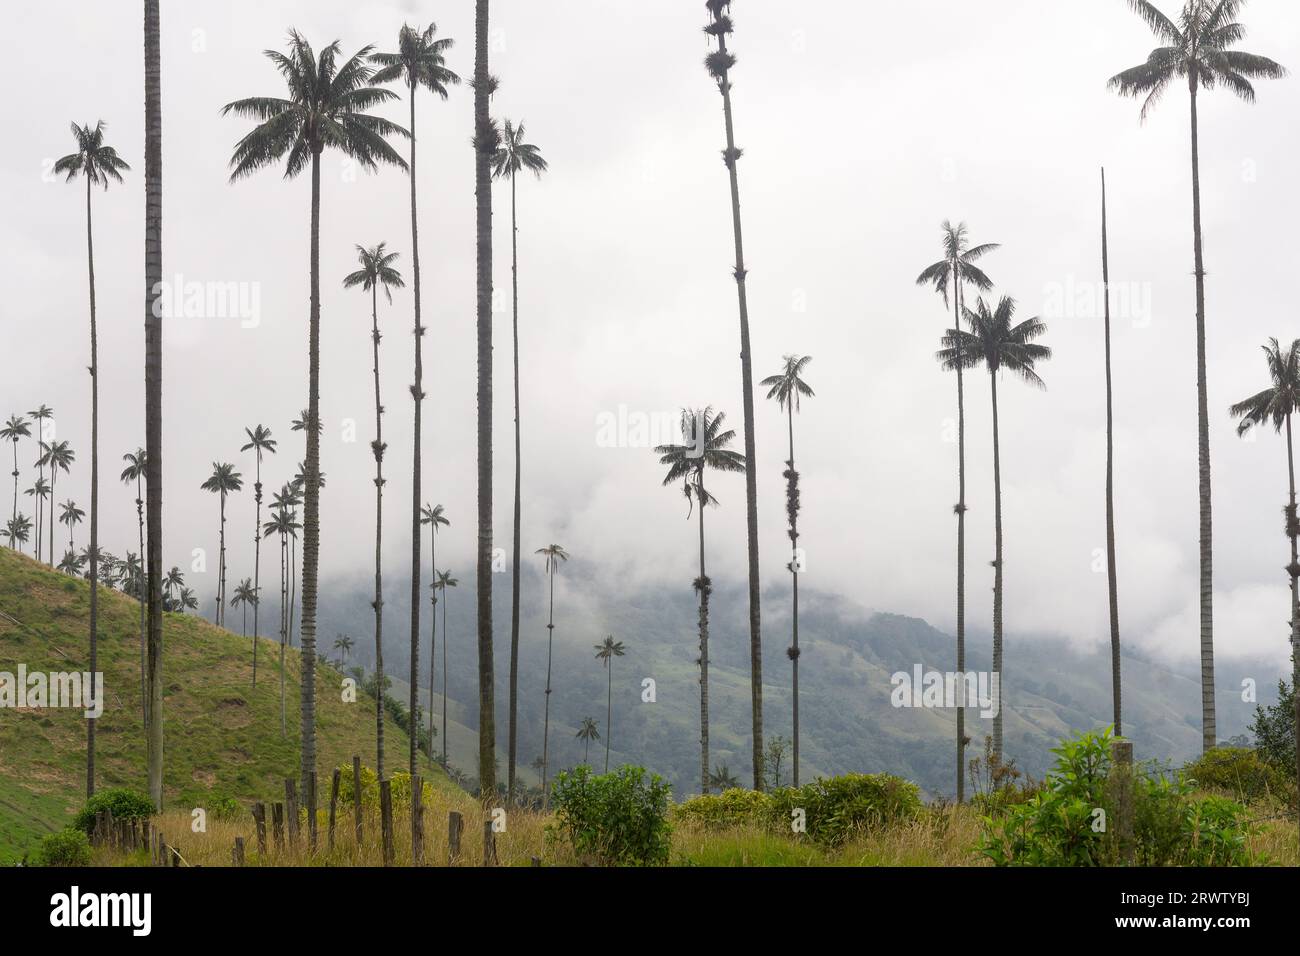 Cocora Valley in Los Nevados National Park, Colombia - Wax palm is the Colombian national tree and endangered species under risk of disappearance. Stock Photo